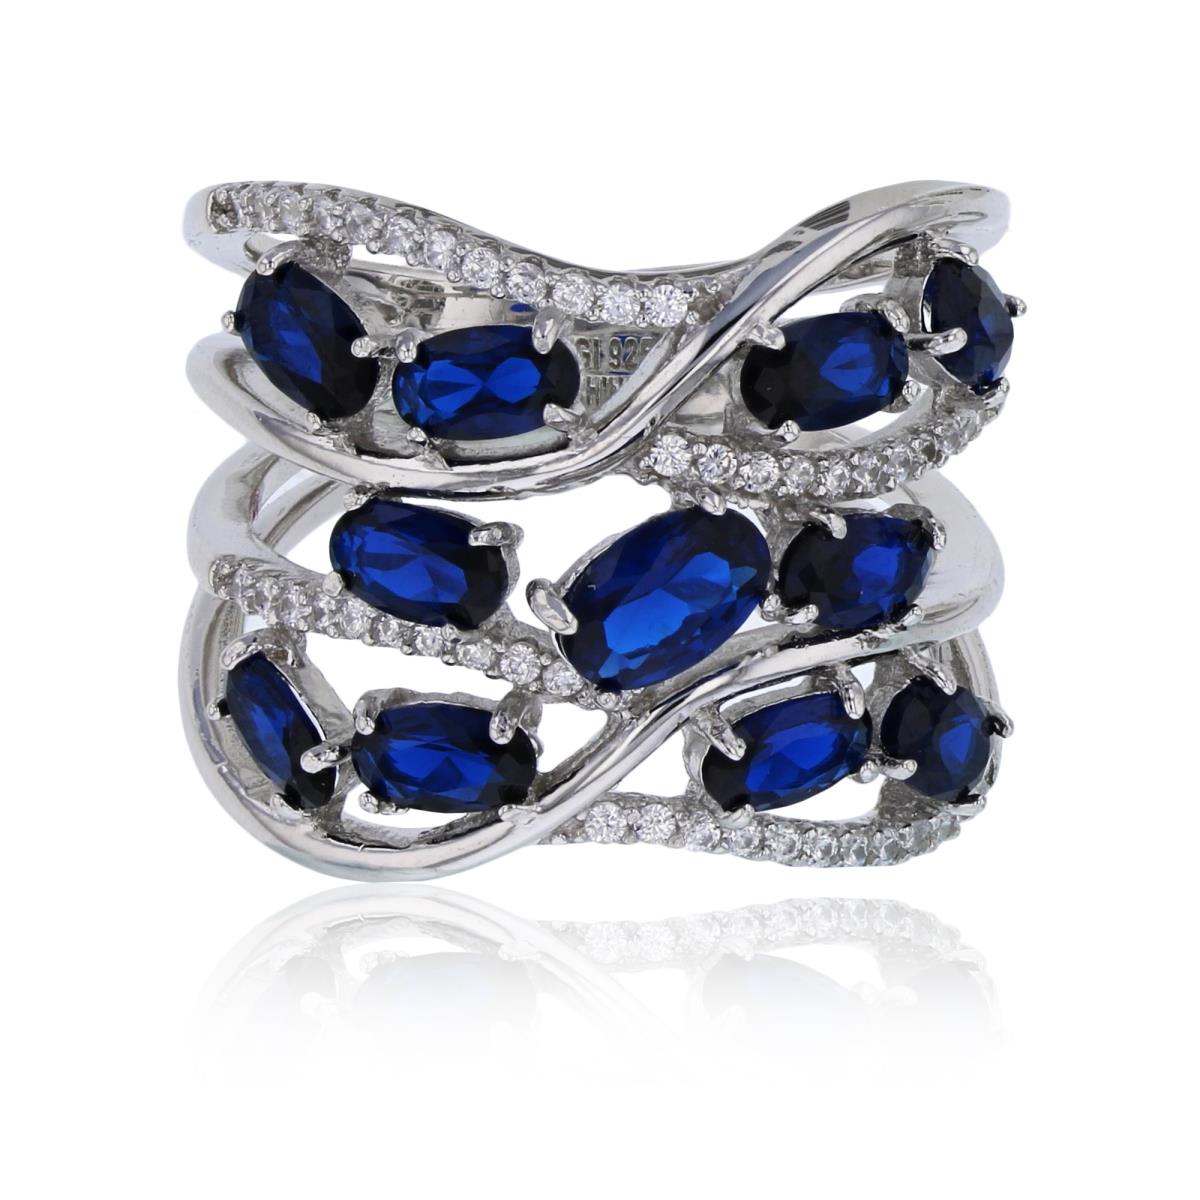 Sterling Silver Rhodium Pave 4-Strand Floating Blue Oval Cut CZ Fashion Ring